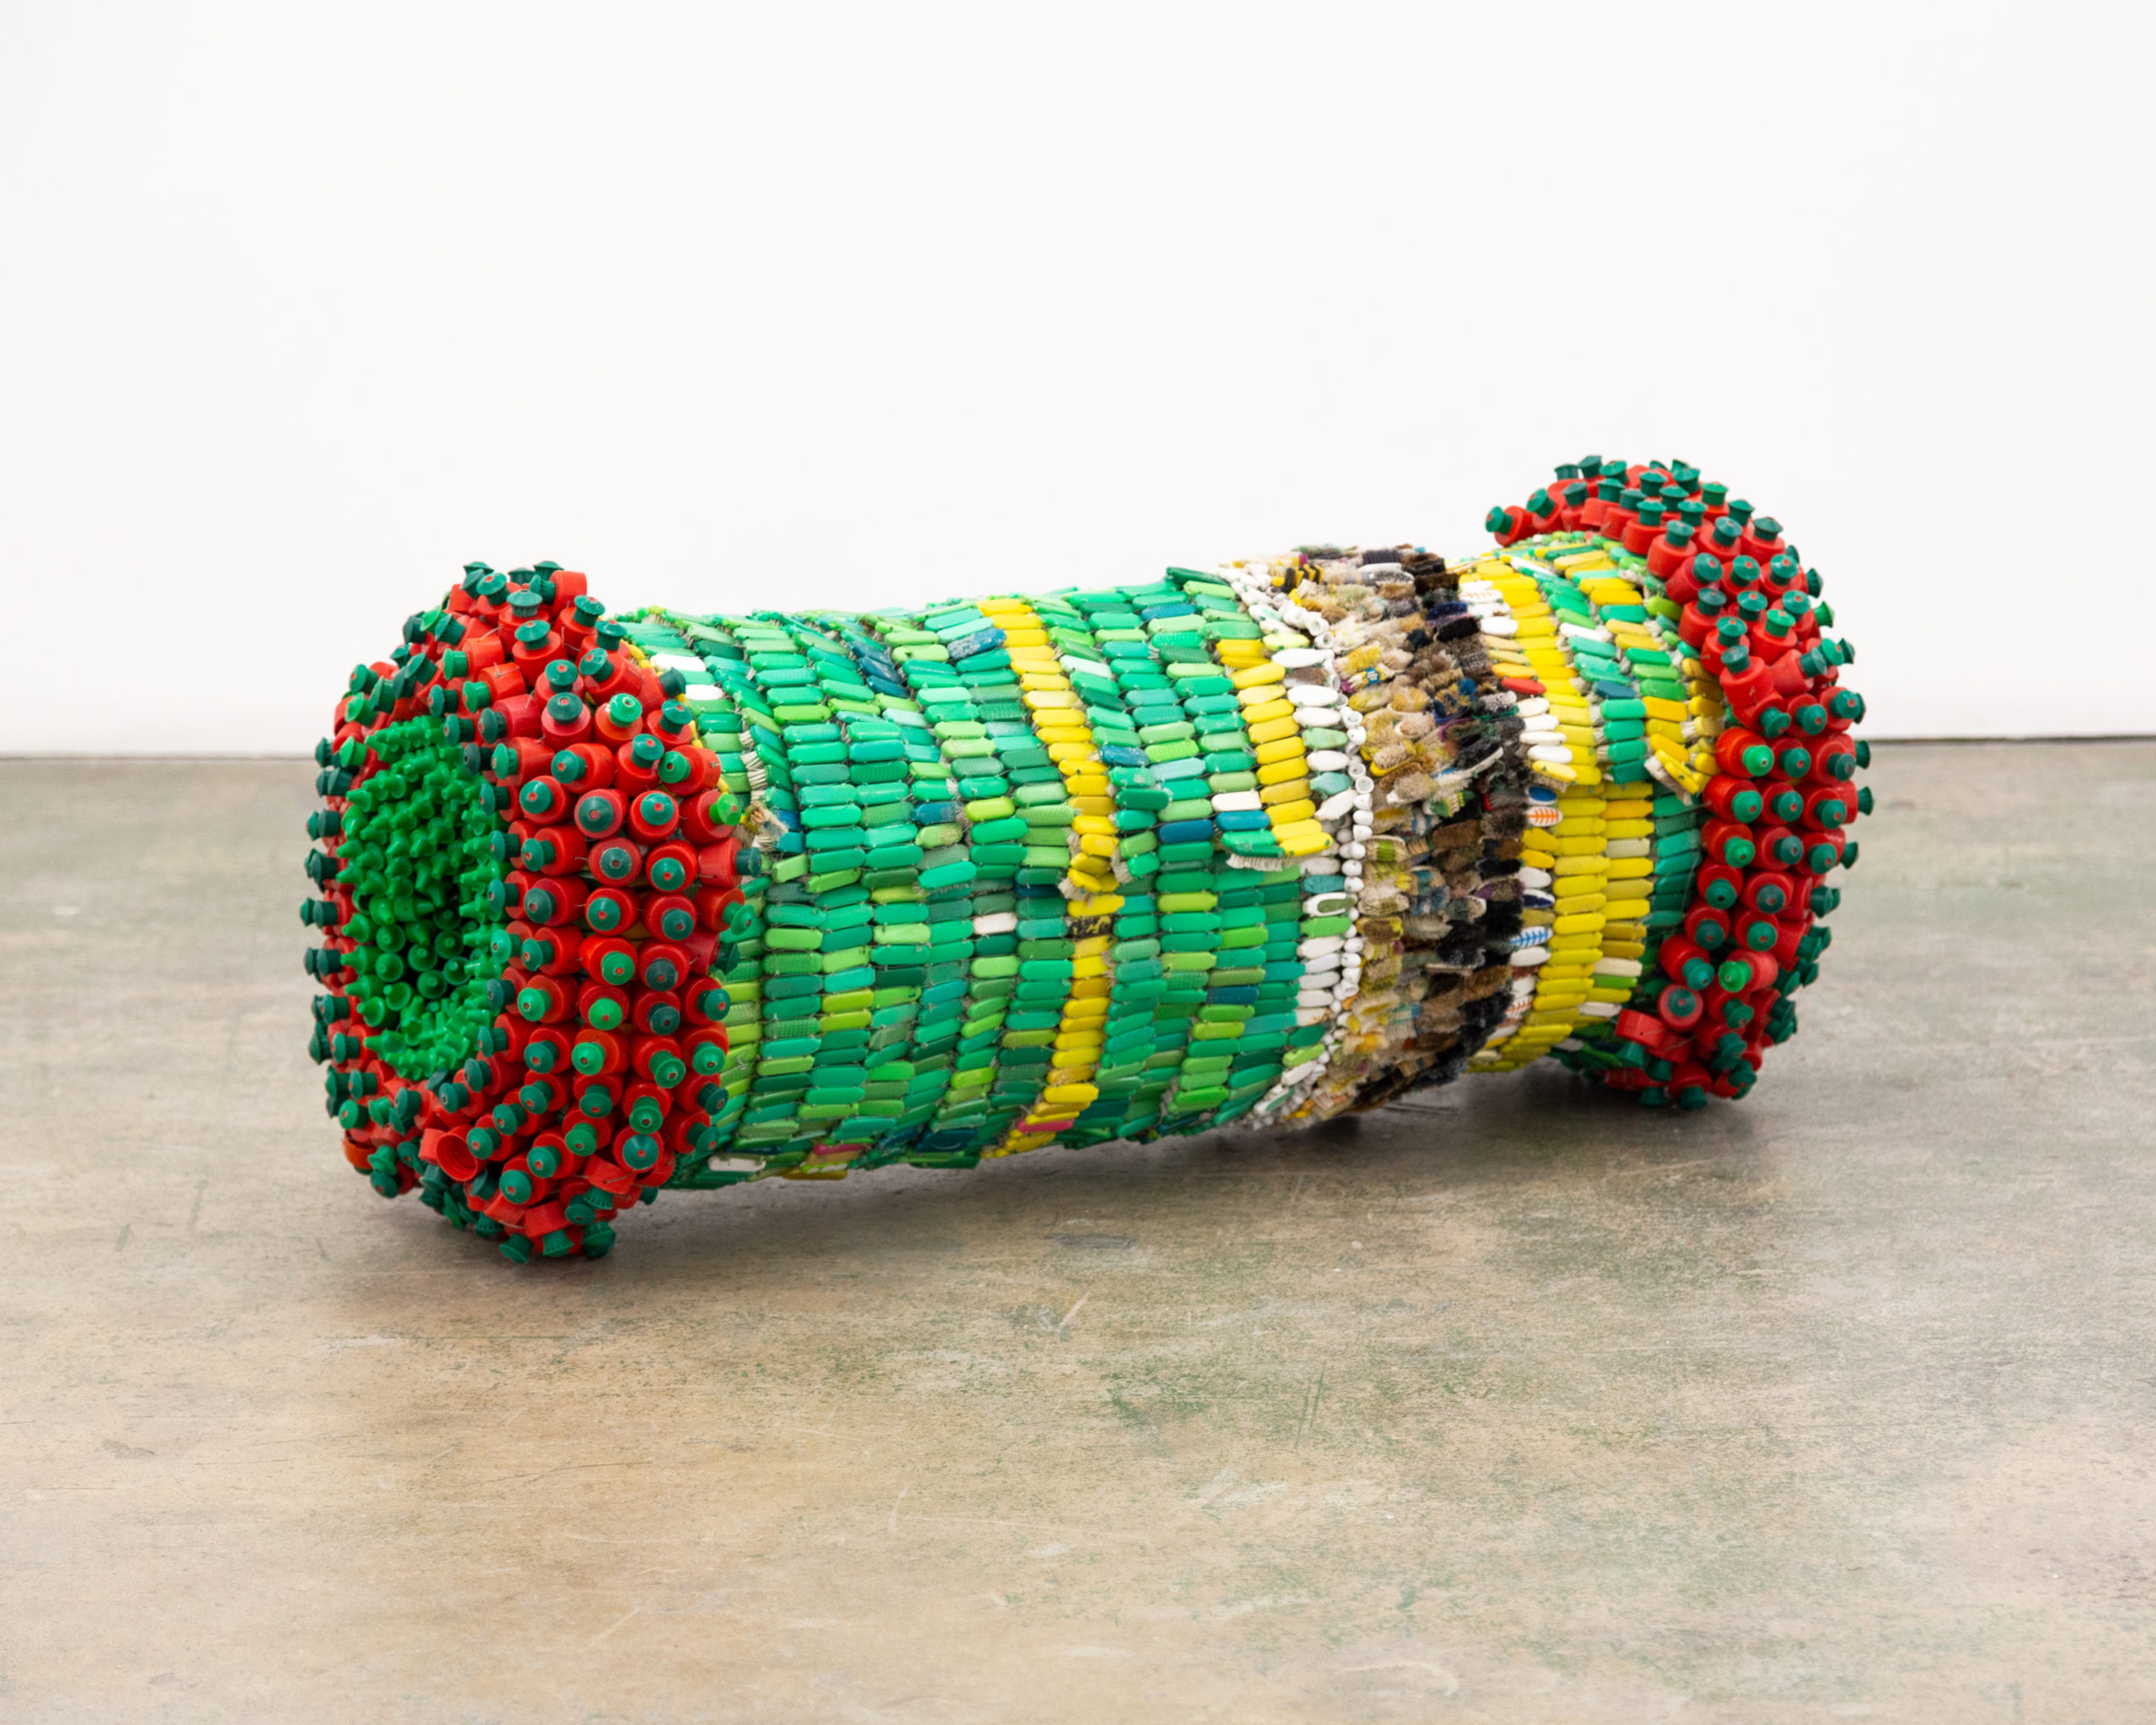 Moffat Takadiwa, Object of Influence (5A), 2021. Toothbrush, Sunlight bottle tops, 59.1 x 19.7 x 19.7 inches. Courtesy of the artist and Nicodim Gallery Los Angeles. Photo: Taylor Tschider.